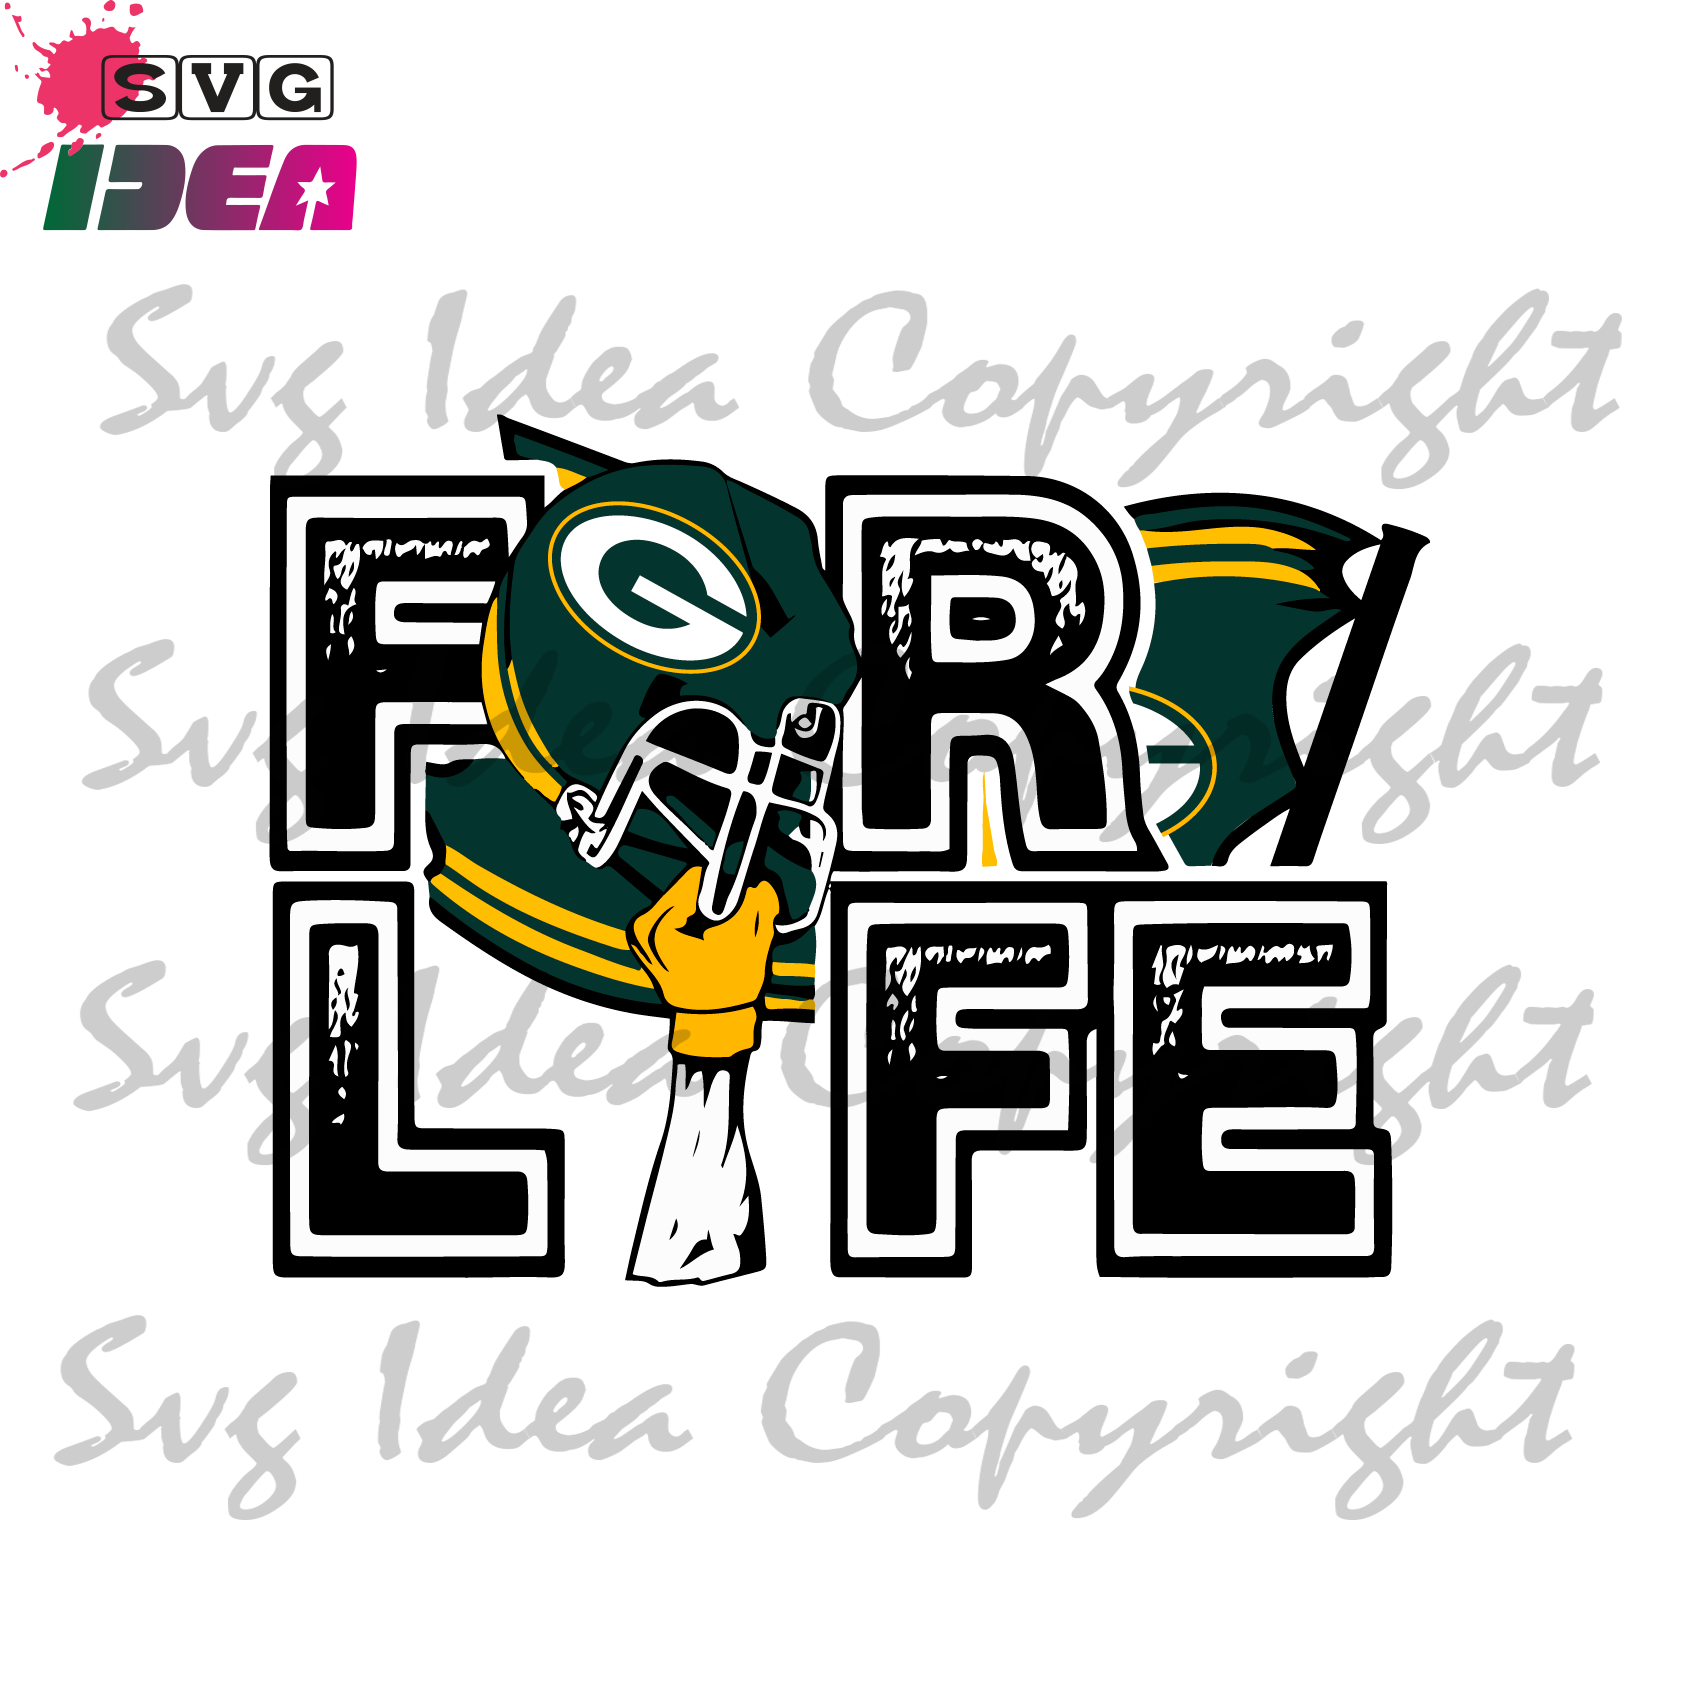 Green Bay Packers For Life NFL Svg, Sport Svg, For Life Svg, Green Bay Packers Svg, Packers Svg, Packers Lovers Svg, Packers Fans Svg, Packers Football Svg, Green Bay Packers Logo Svg, NFL Sv